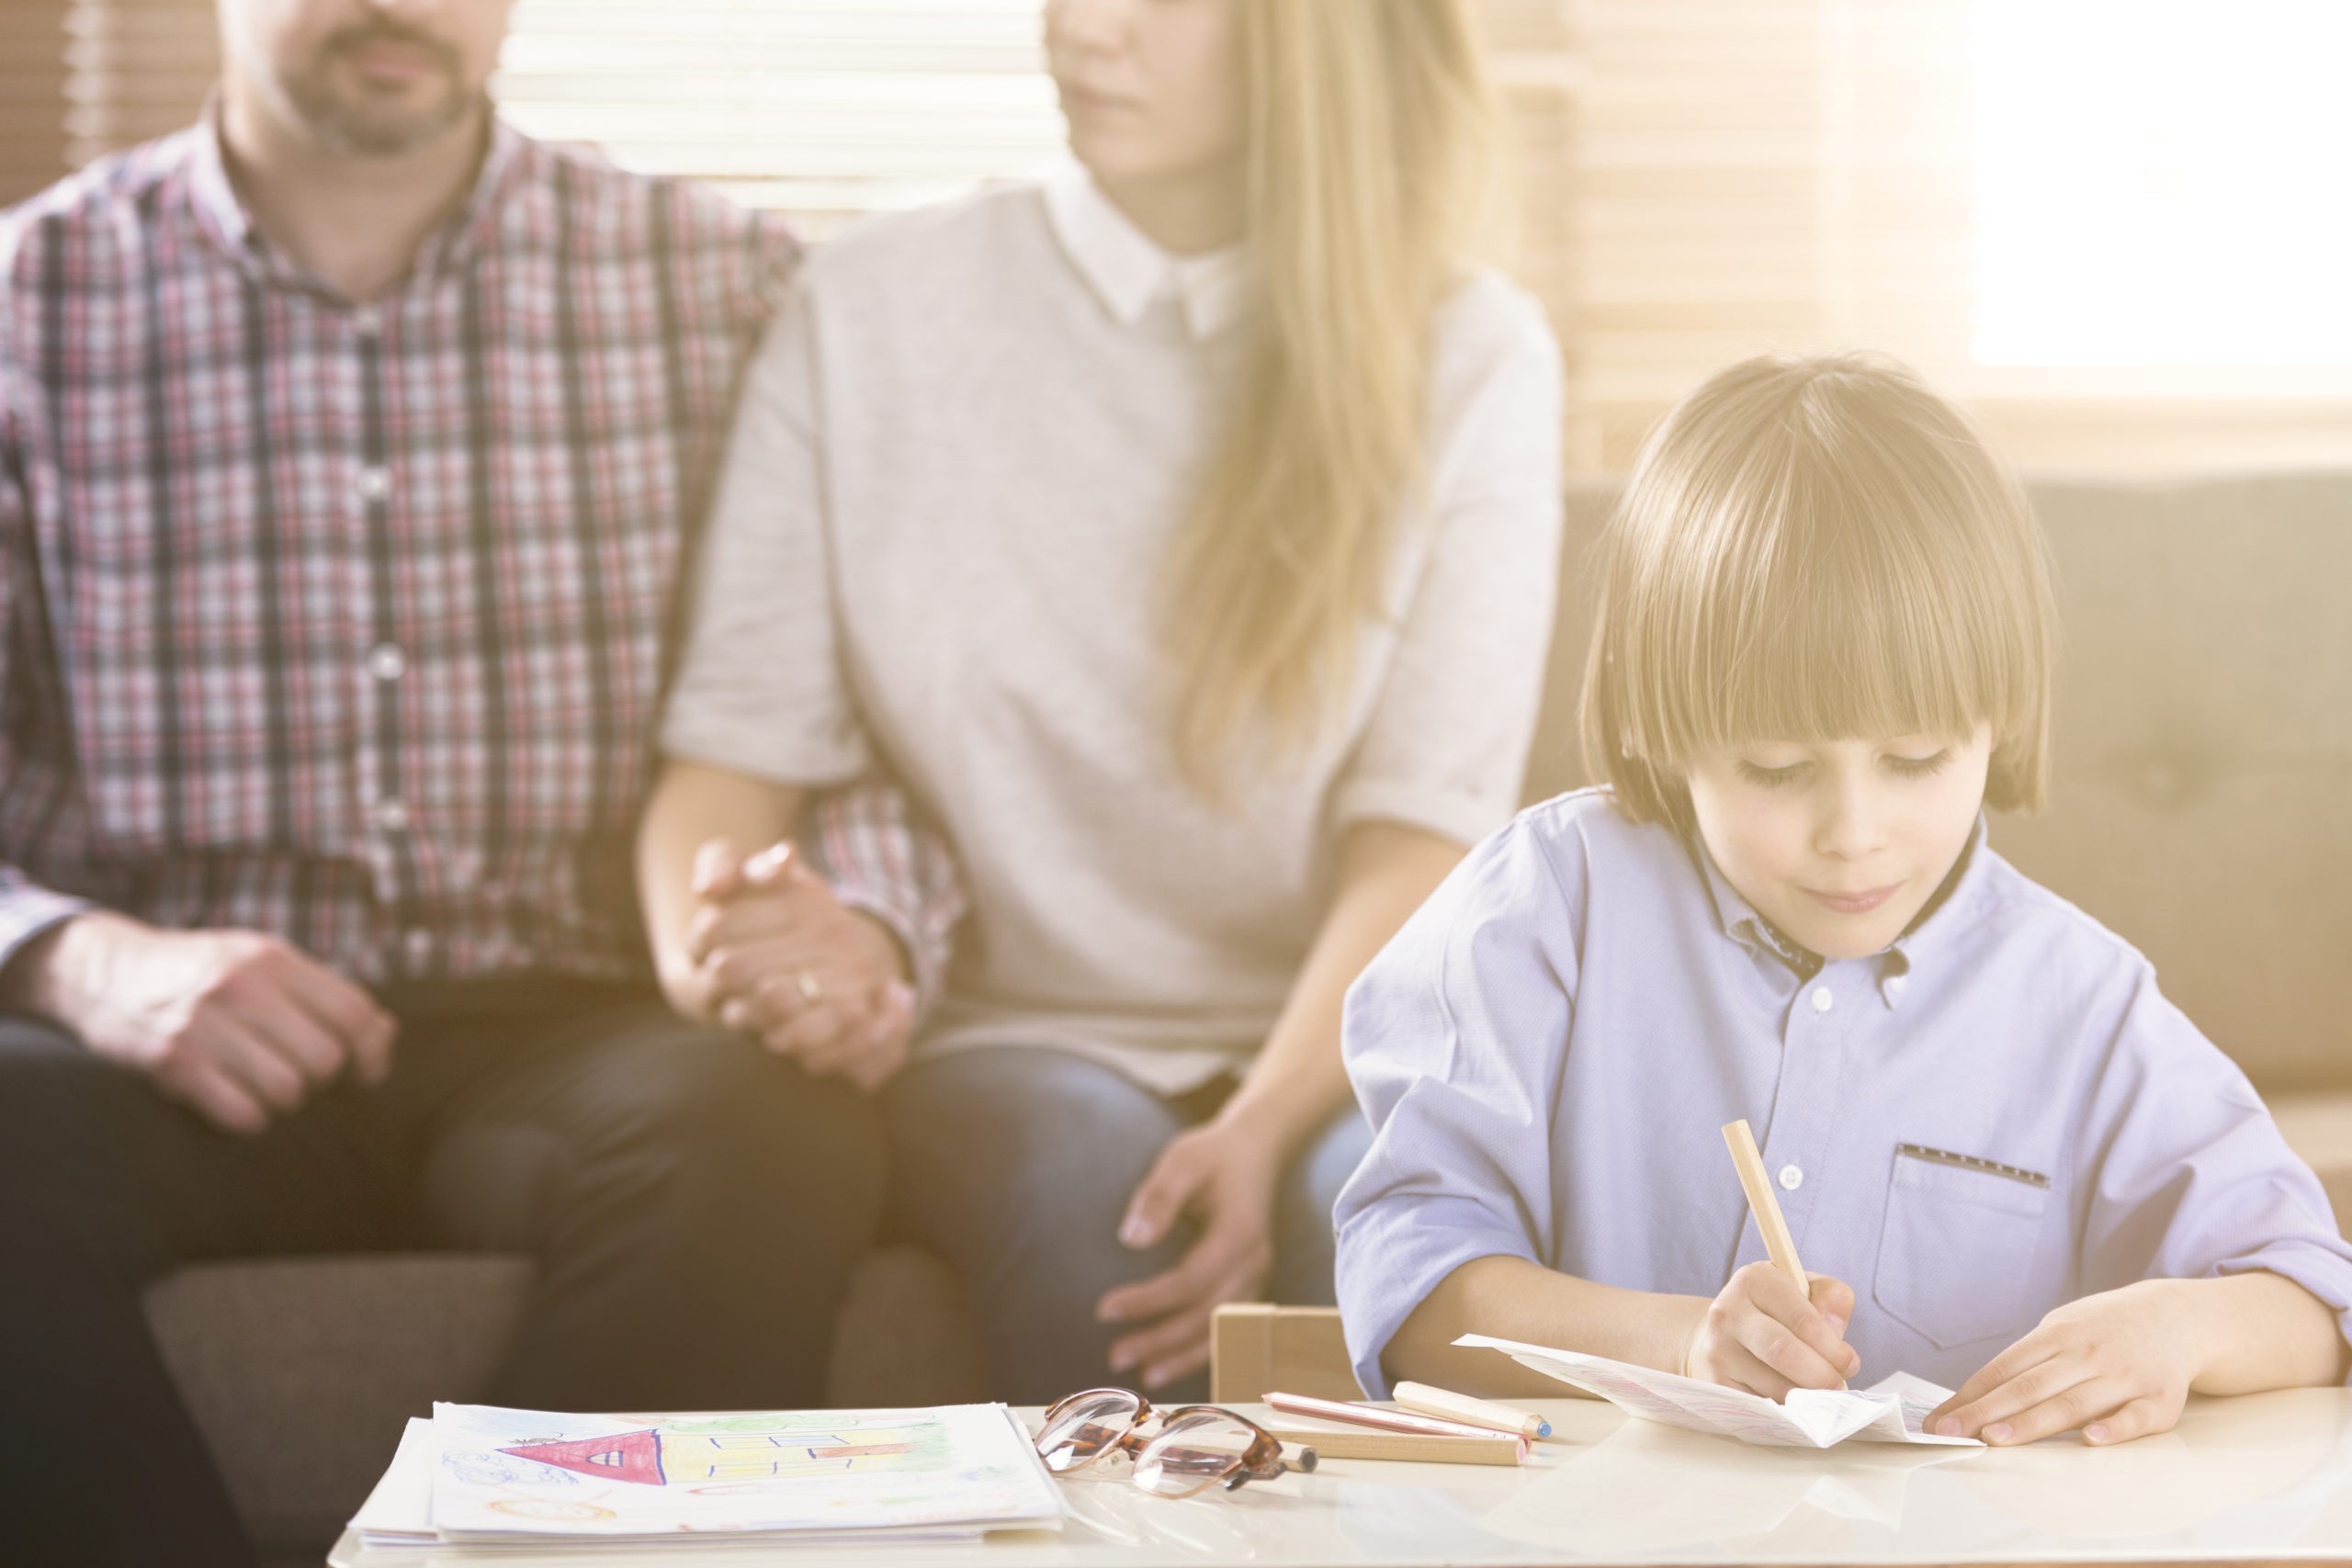 Man and woman holding hands on a couch and a boy in front drawing pictures by a table during a family psychotherapy session. Front view. Flare. Blurred background.